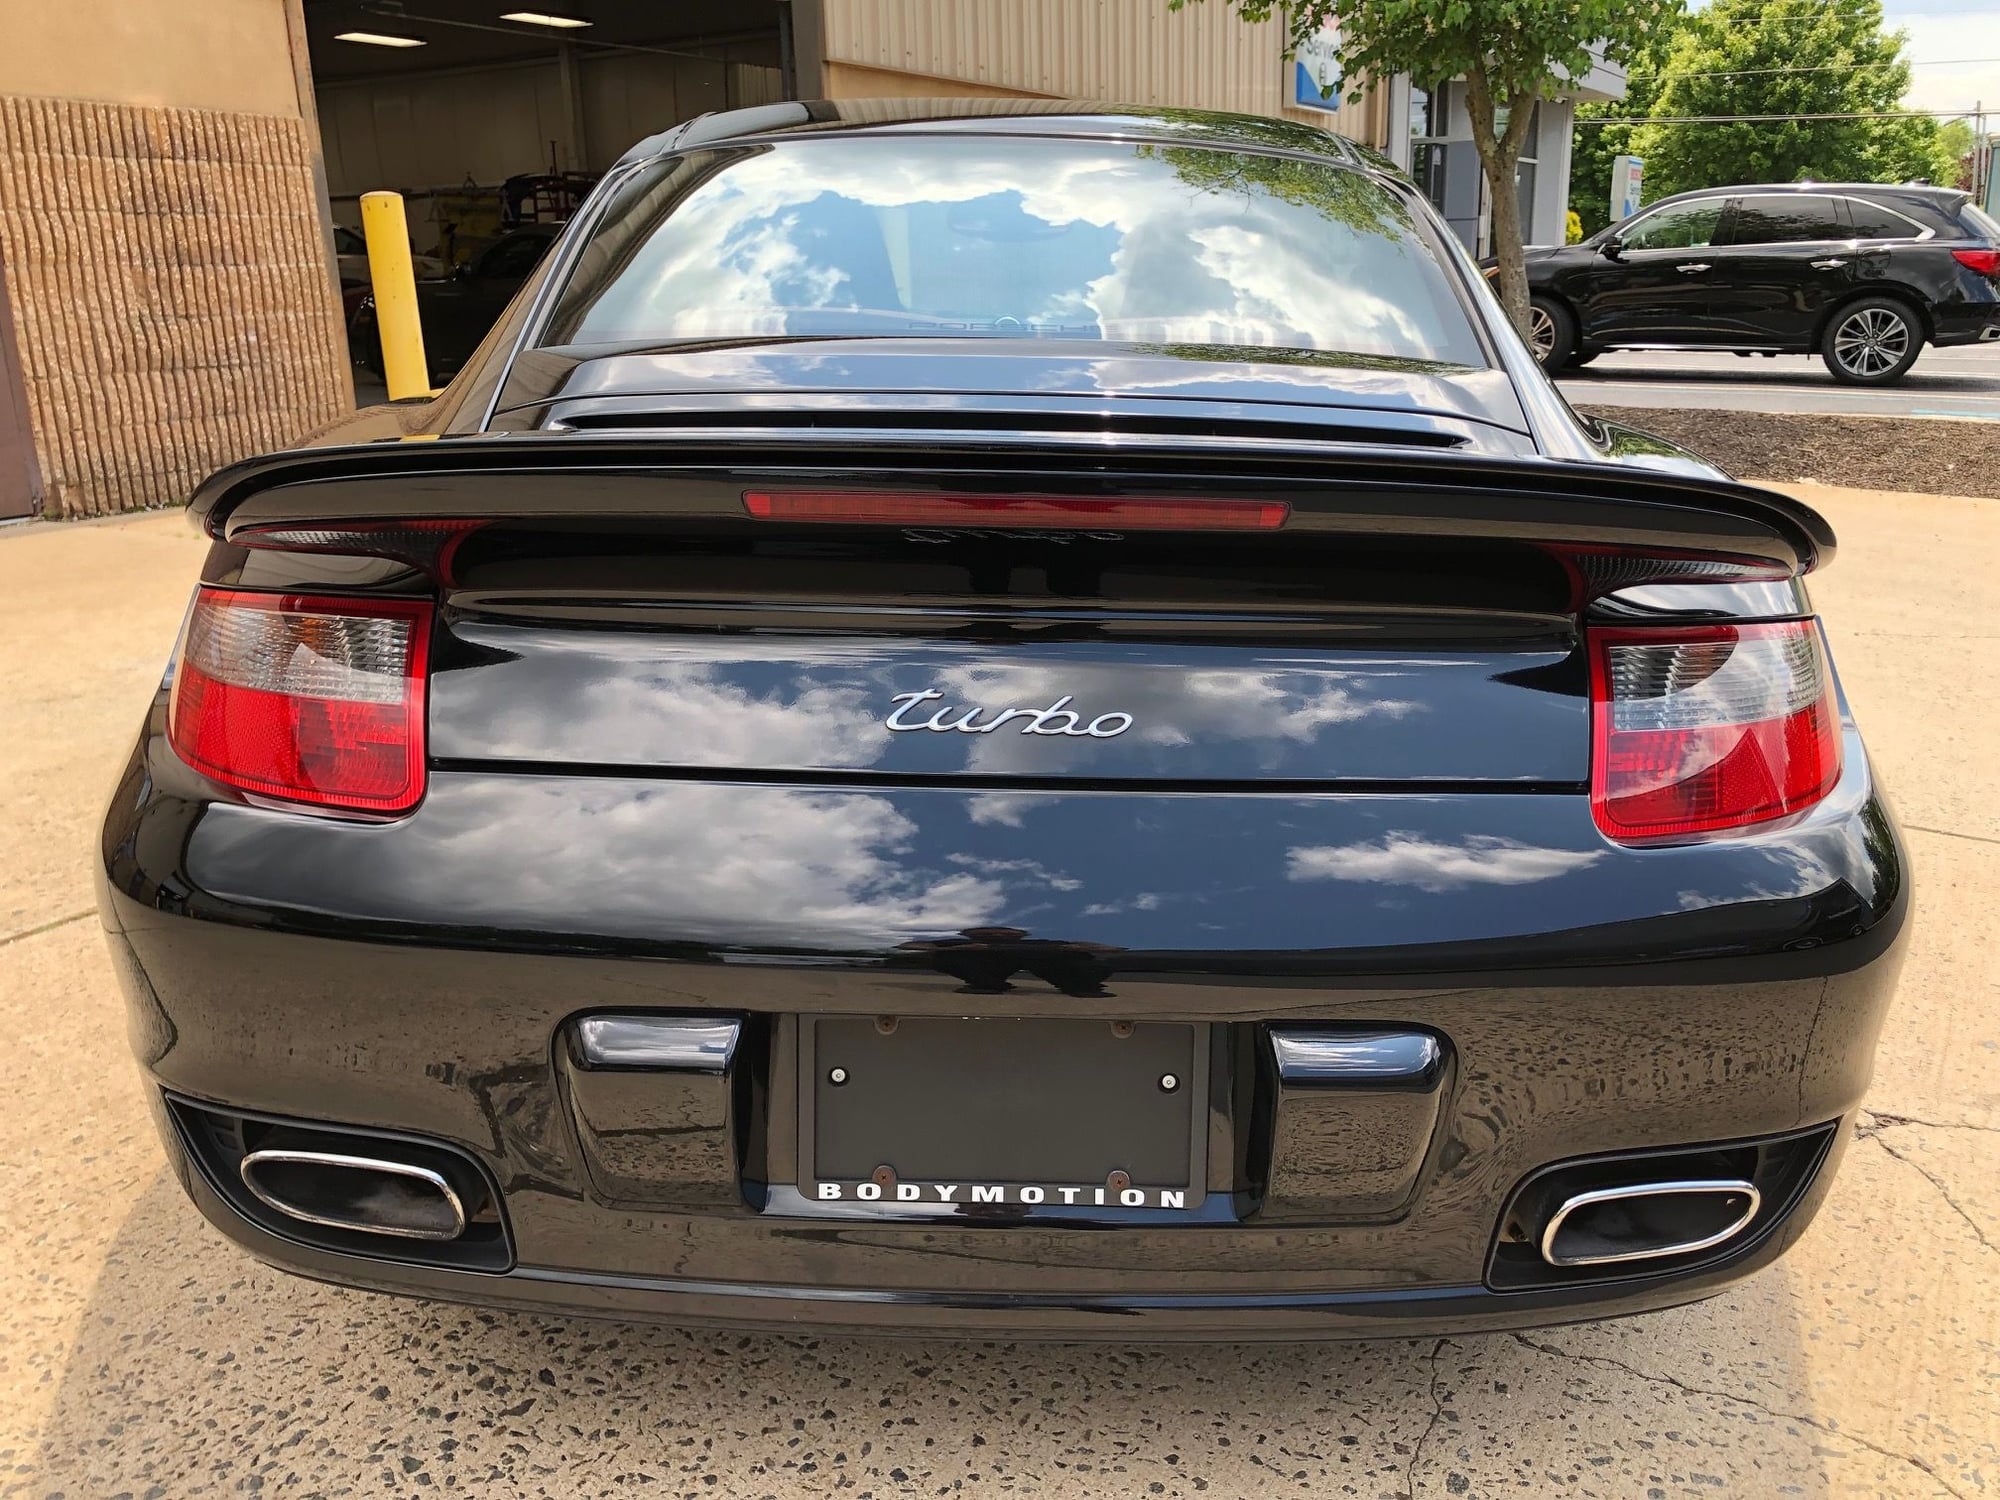 2008 Porsche 911 - 2008 911 Turbo, 997 Turbo, 20K MILES, 1 OWNER - Used - VIN WP0AD29908S783746 - 20,423 Miles - 6 cyl - AWD - Manual - Coupe - Black - Ocean, NJ 07712, United States